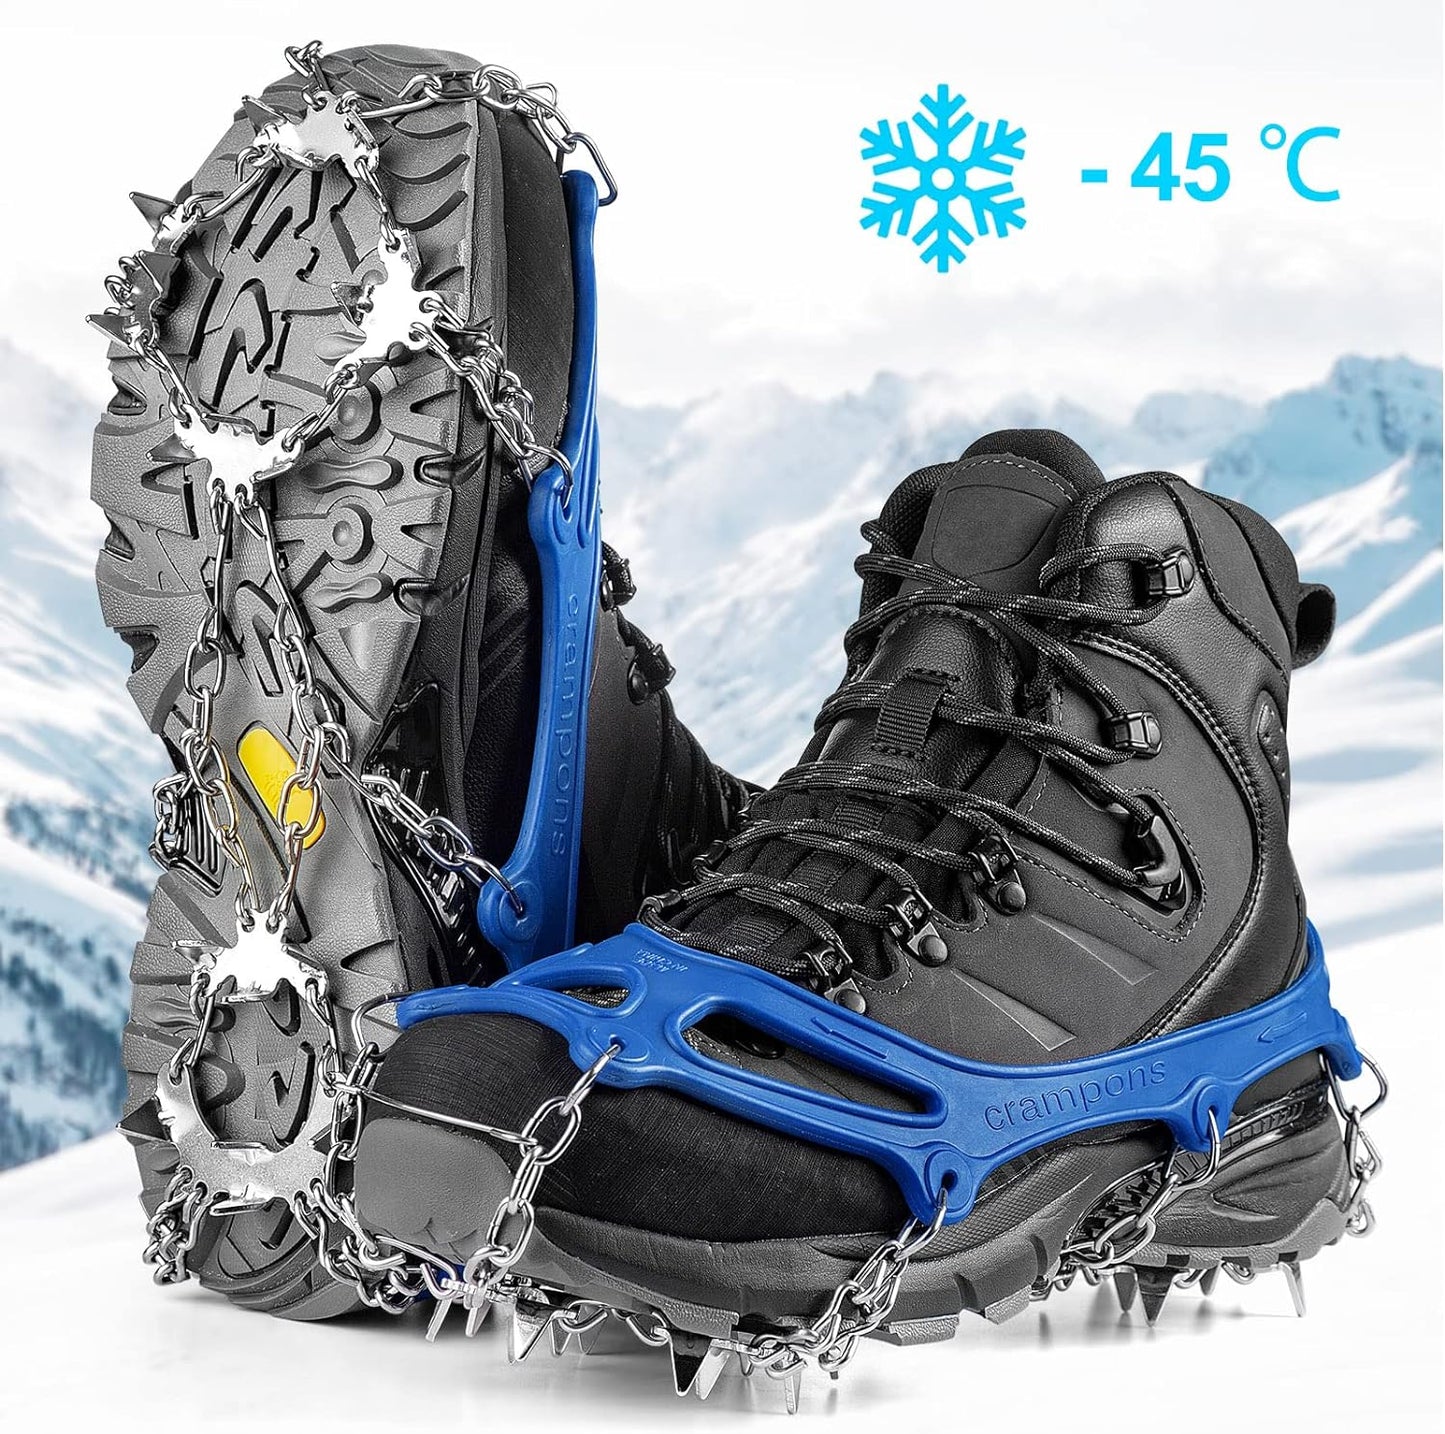 19 Spikes Crampons Ice Cleats Traction Snow Grips Anti Slip Shoes Chain